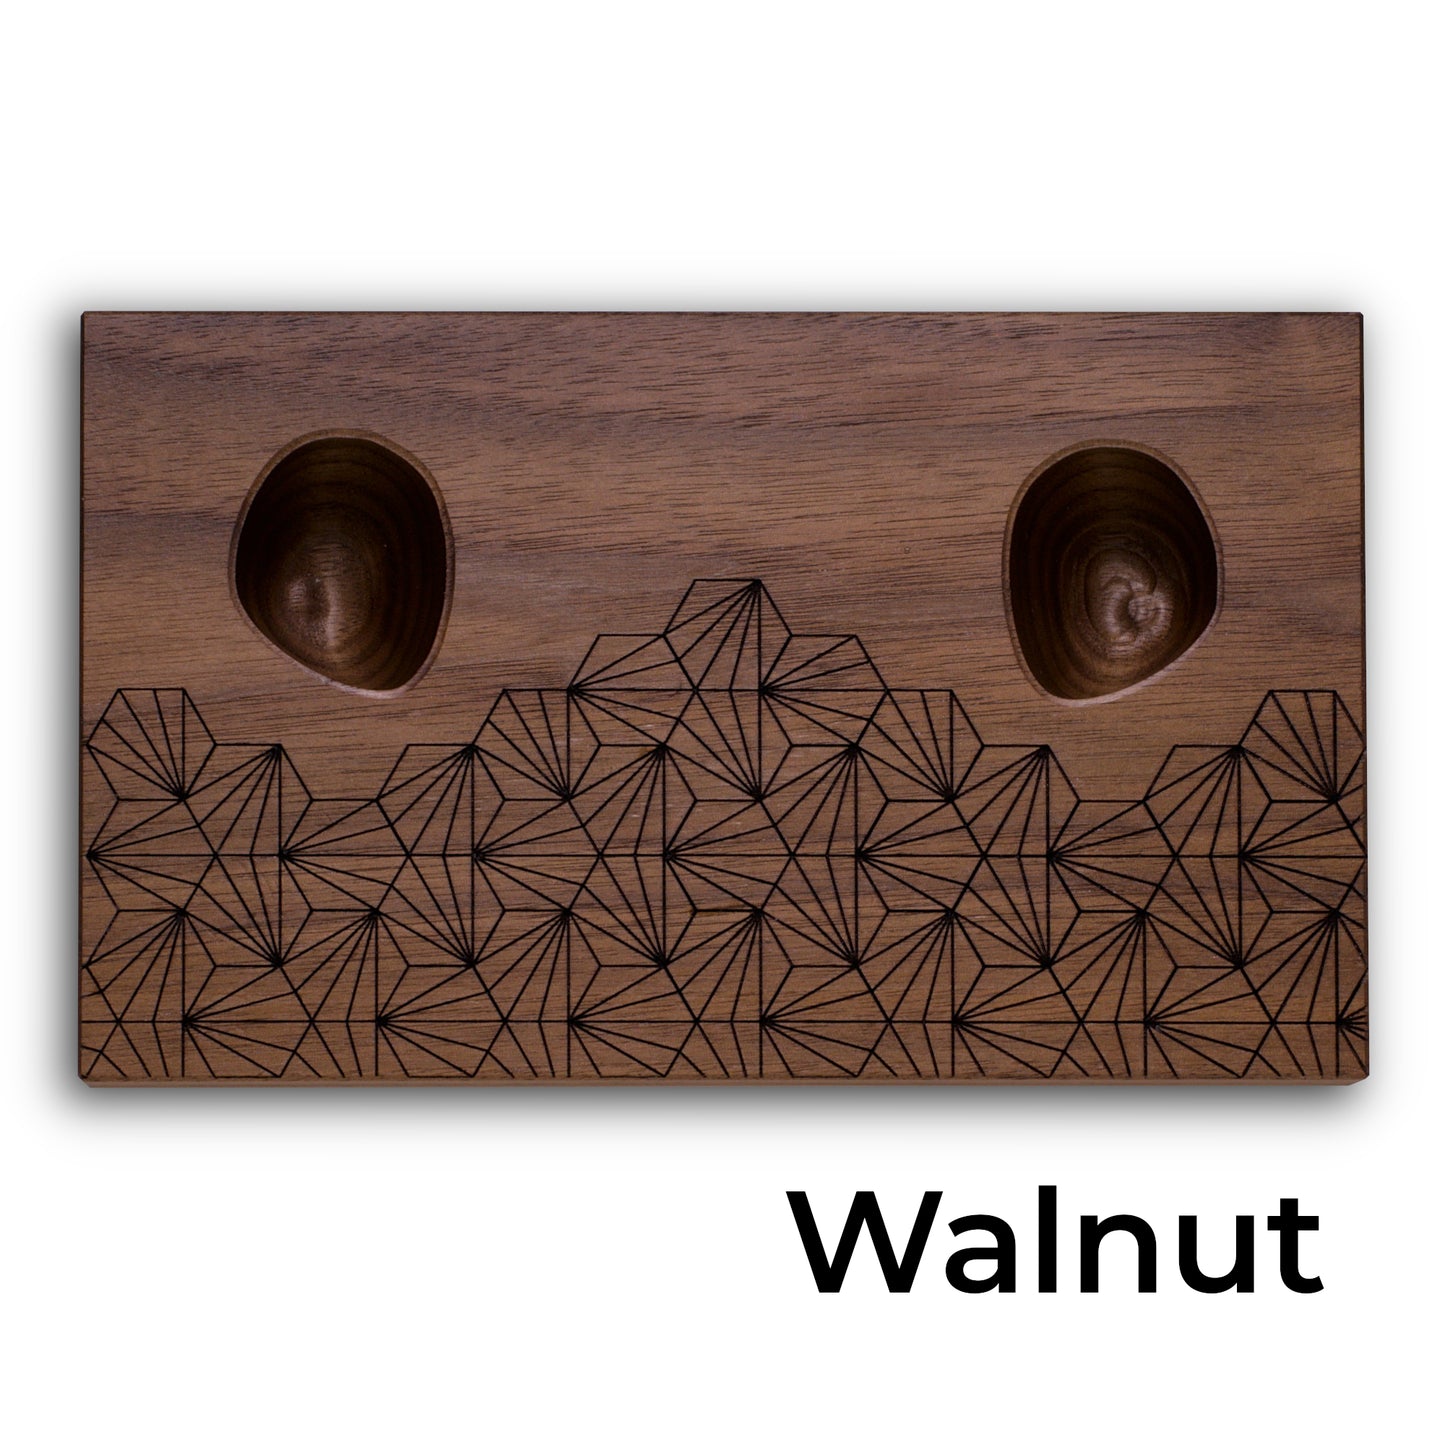 Wooden stand with geometric pattern in walnut for Nintendo switch pro controller